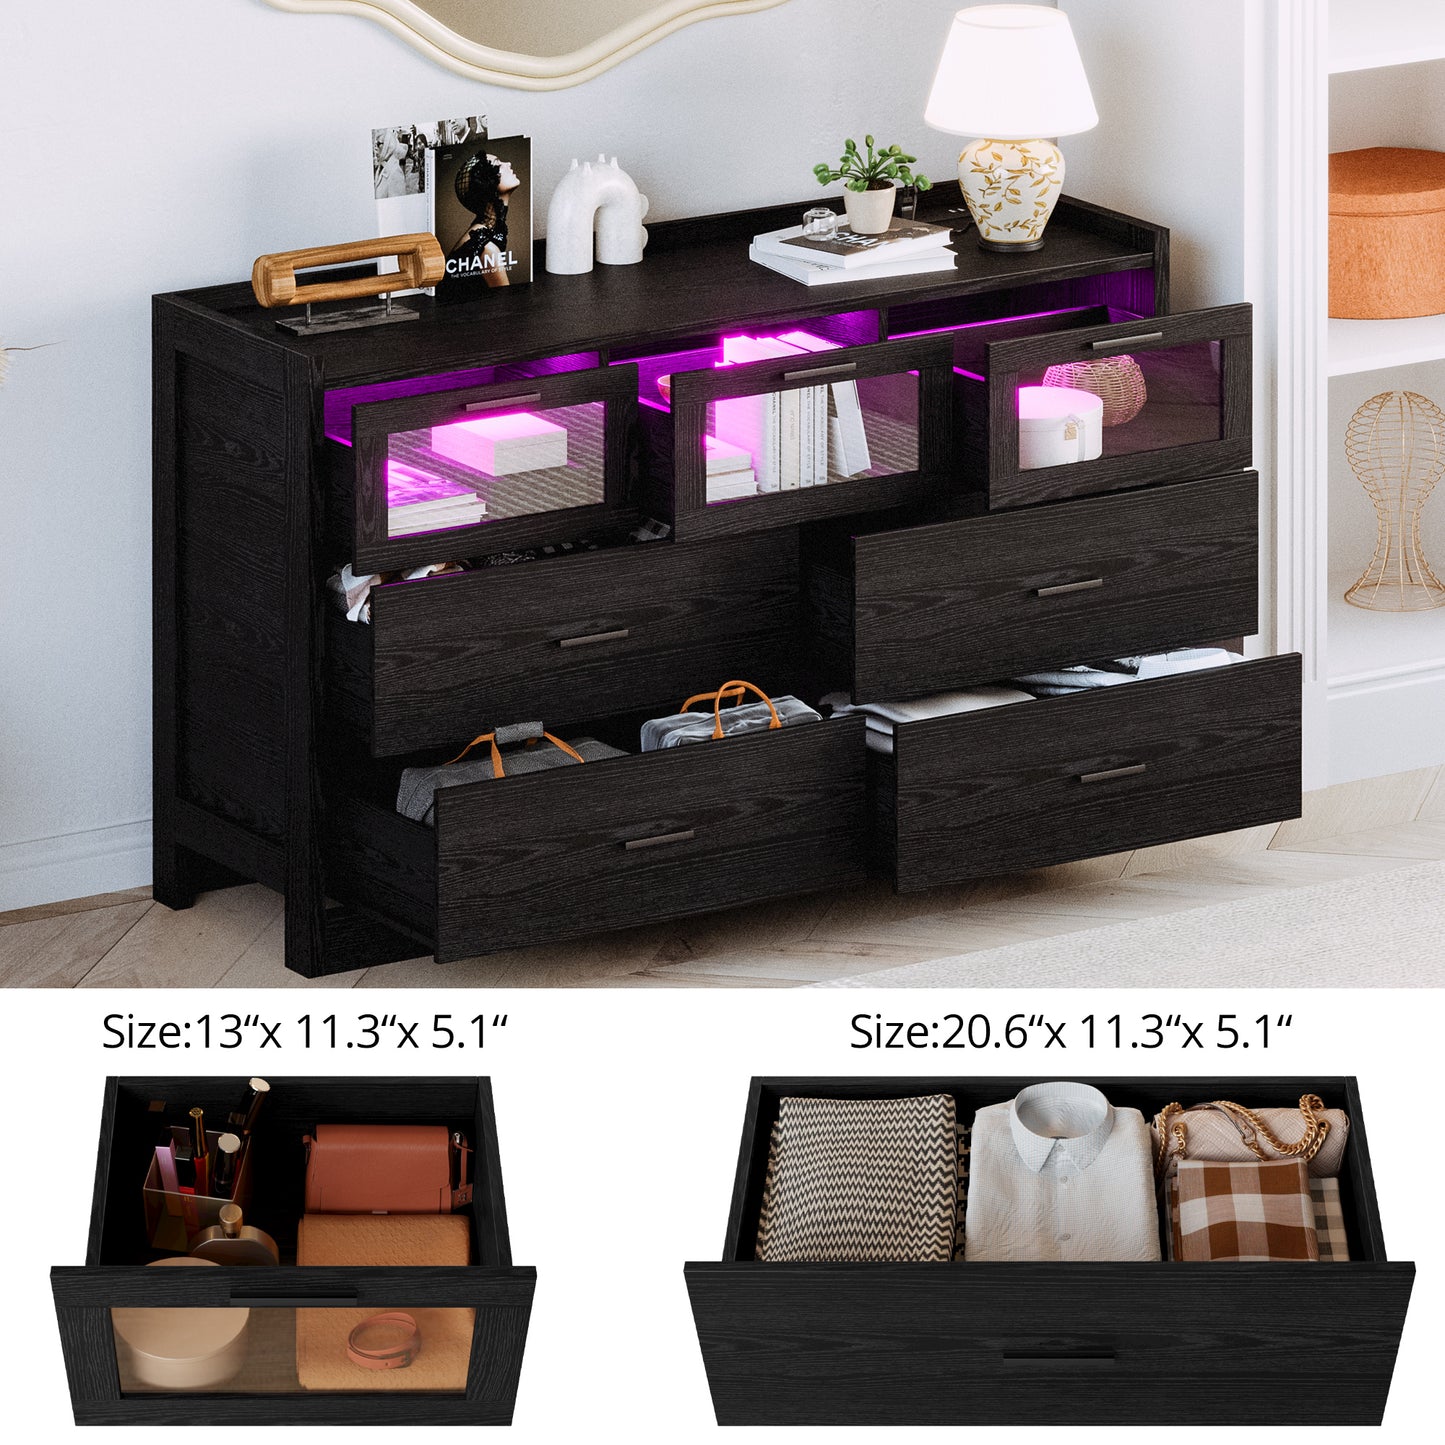 LIKIMIO 47" LED Dresser with 7 Drawers